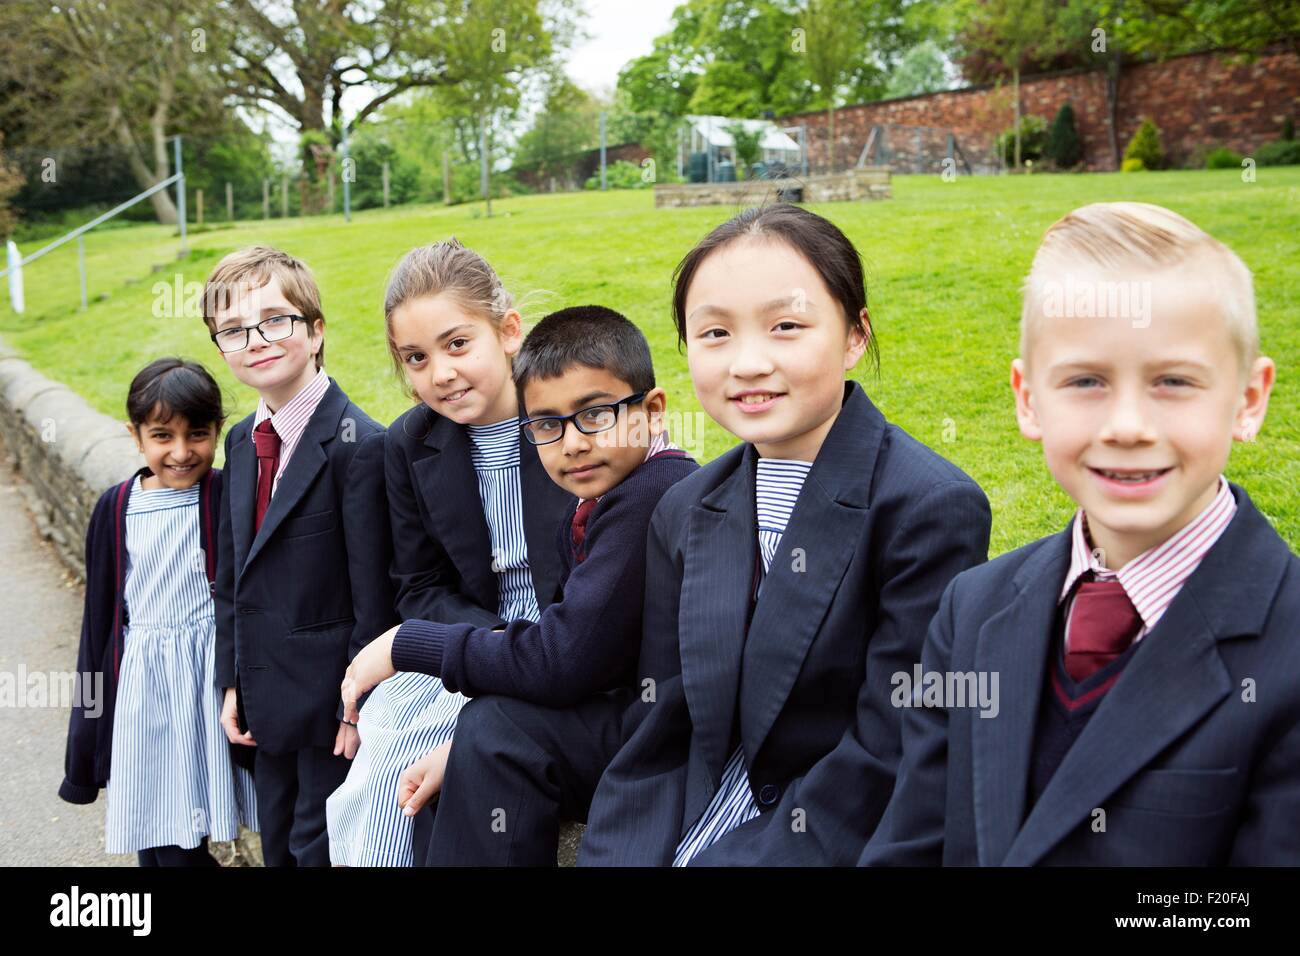 Group of young classmates in playground Stock Photo